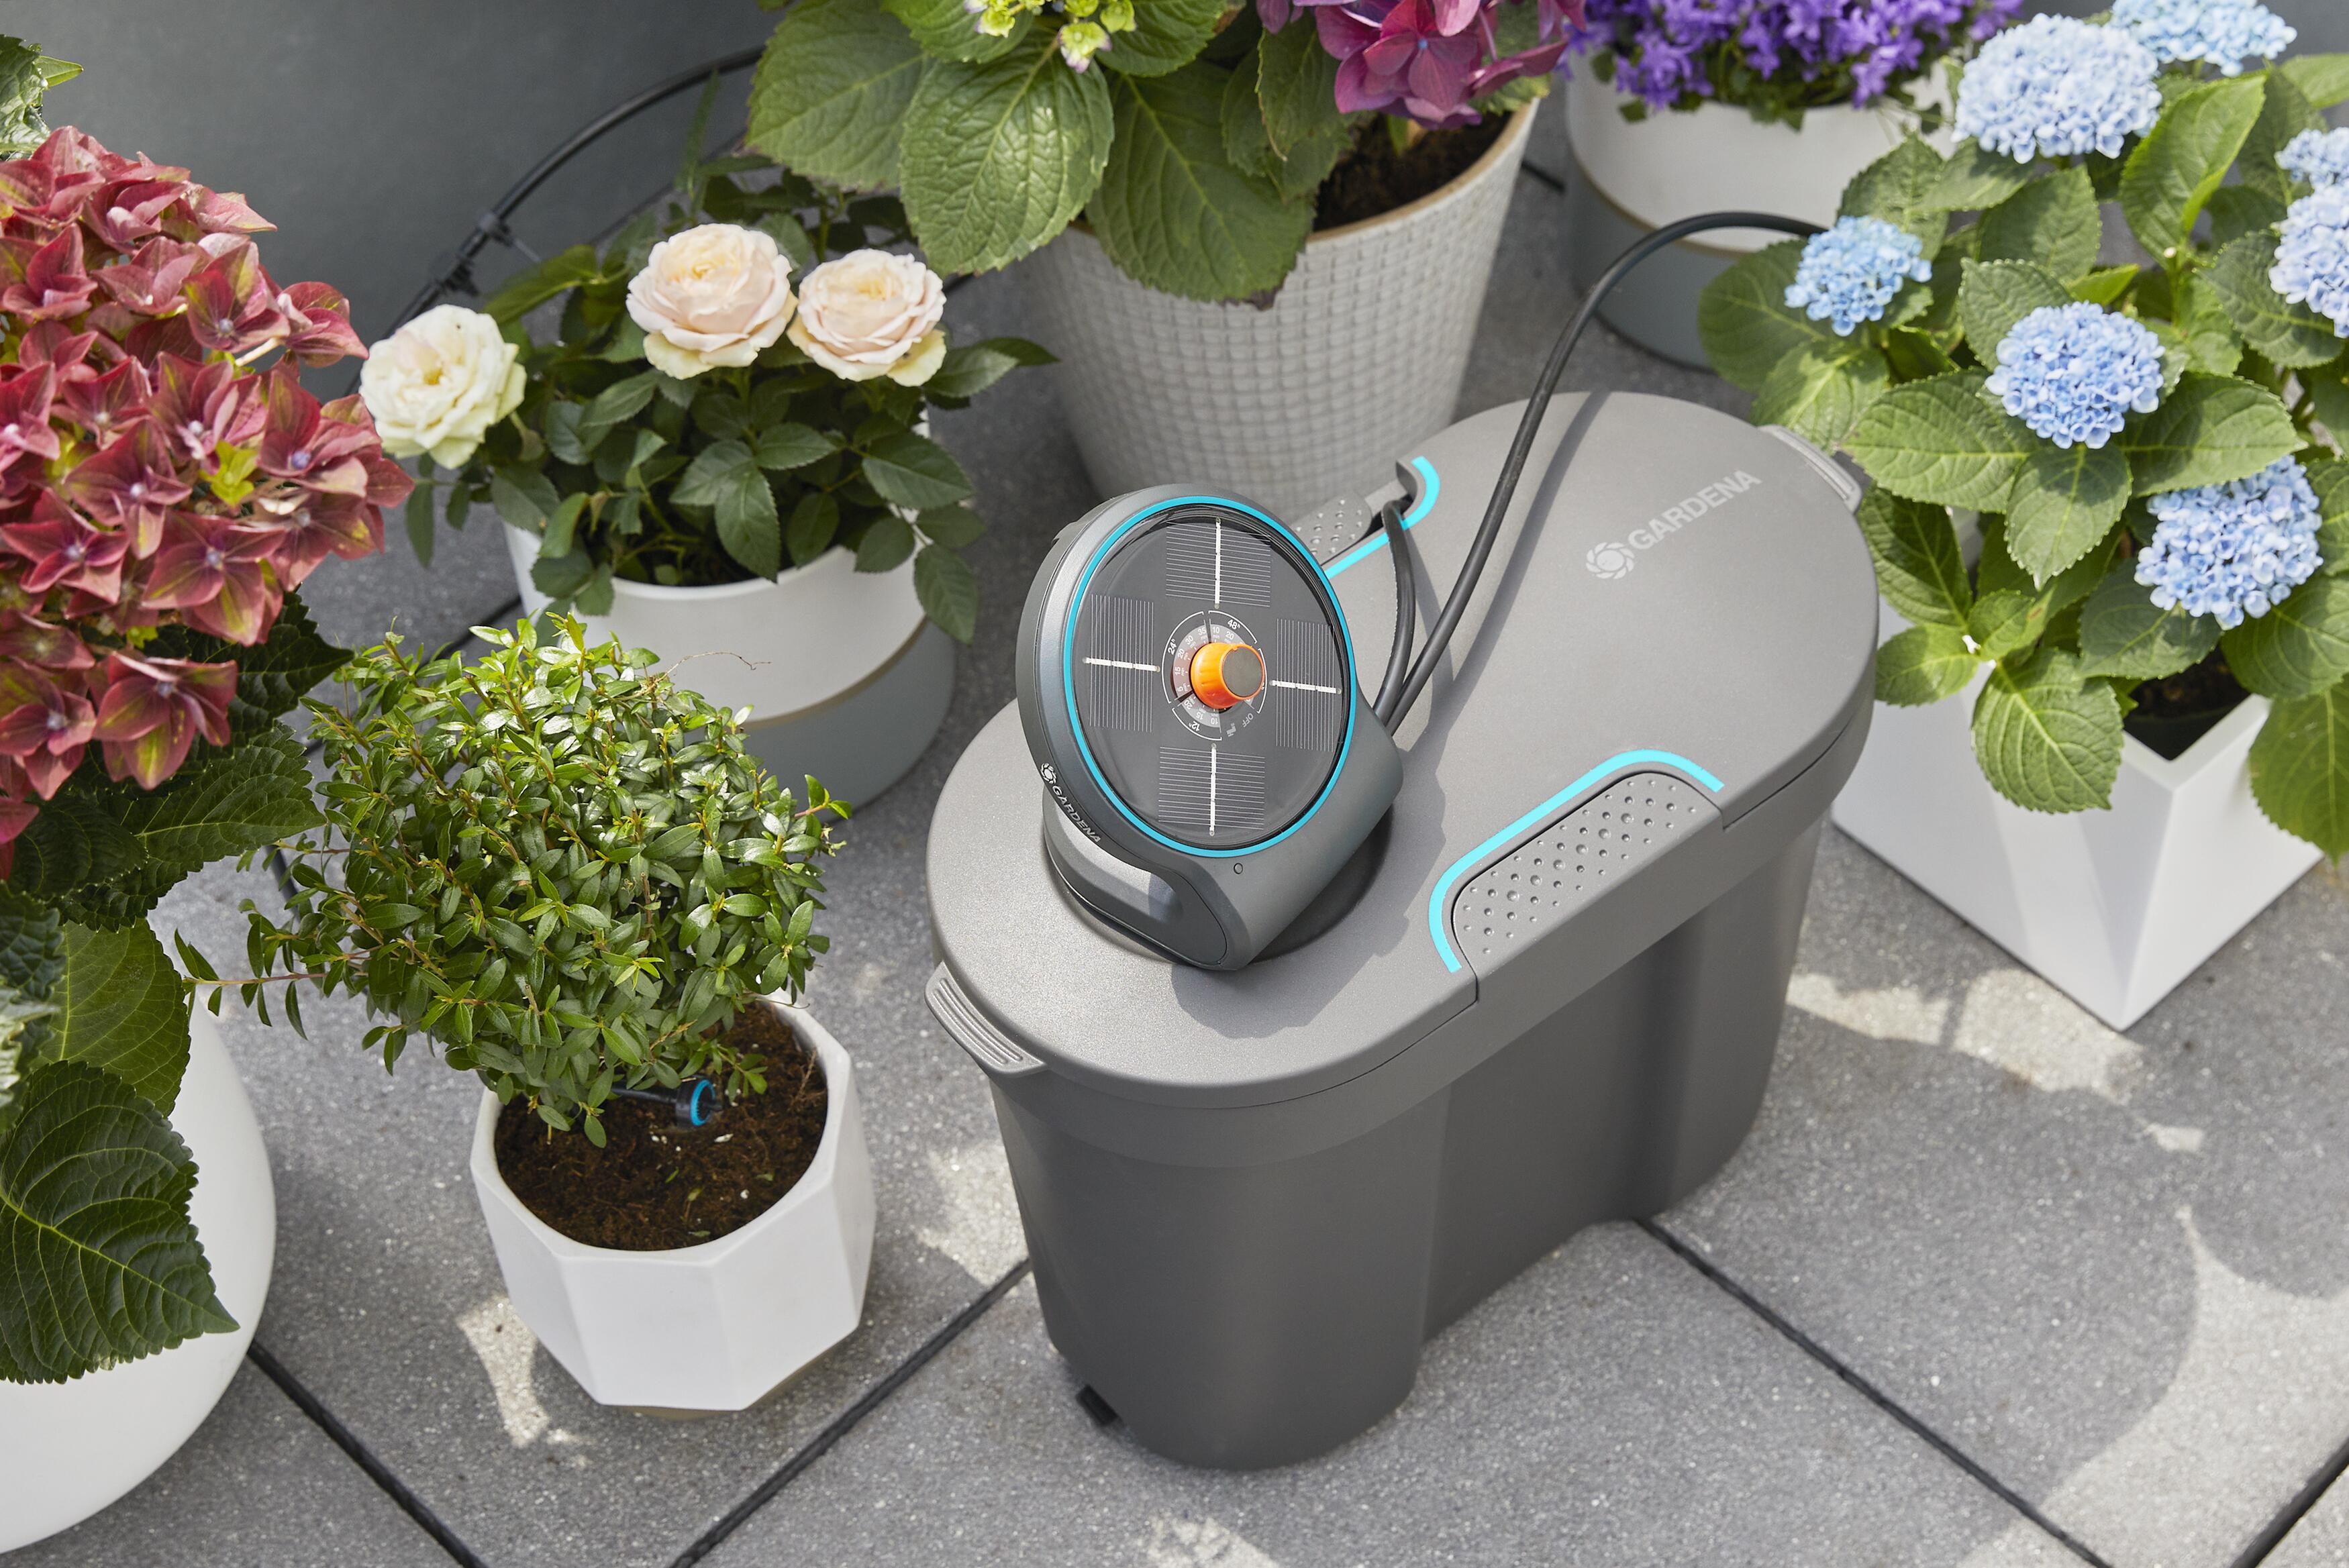 AquaBloom Automatic Plant Watering System